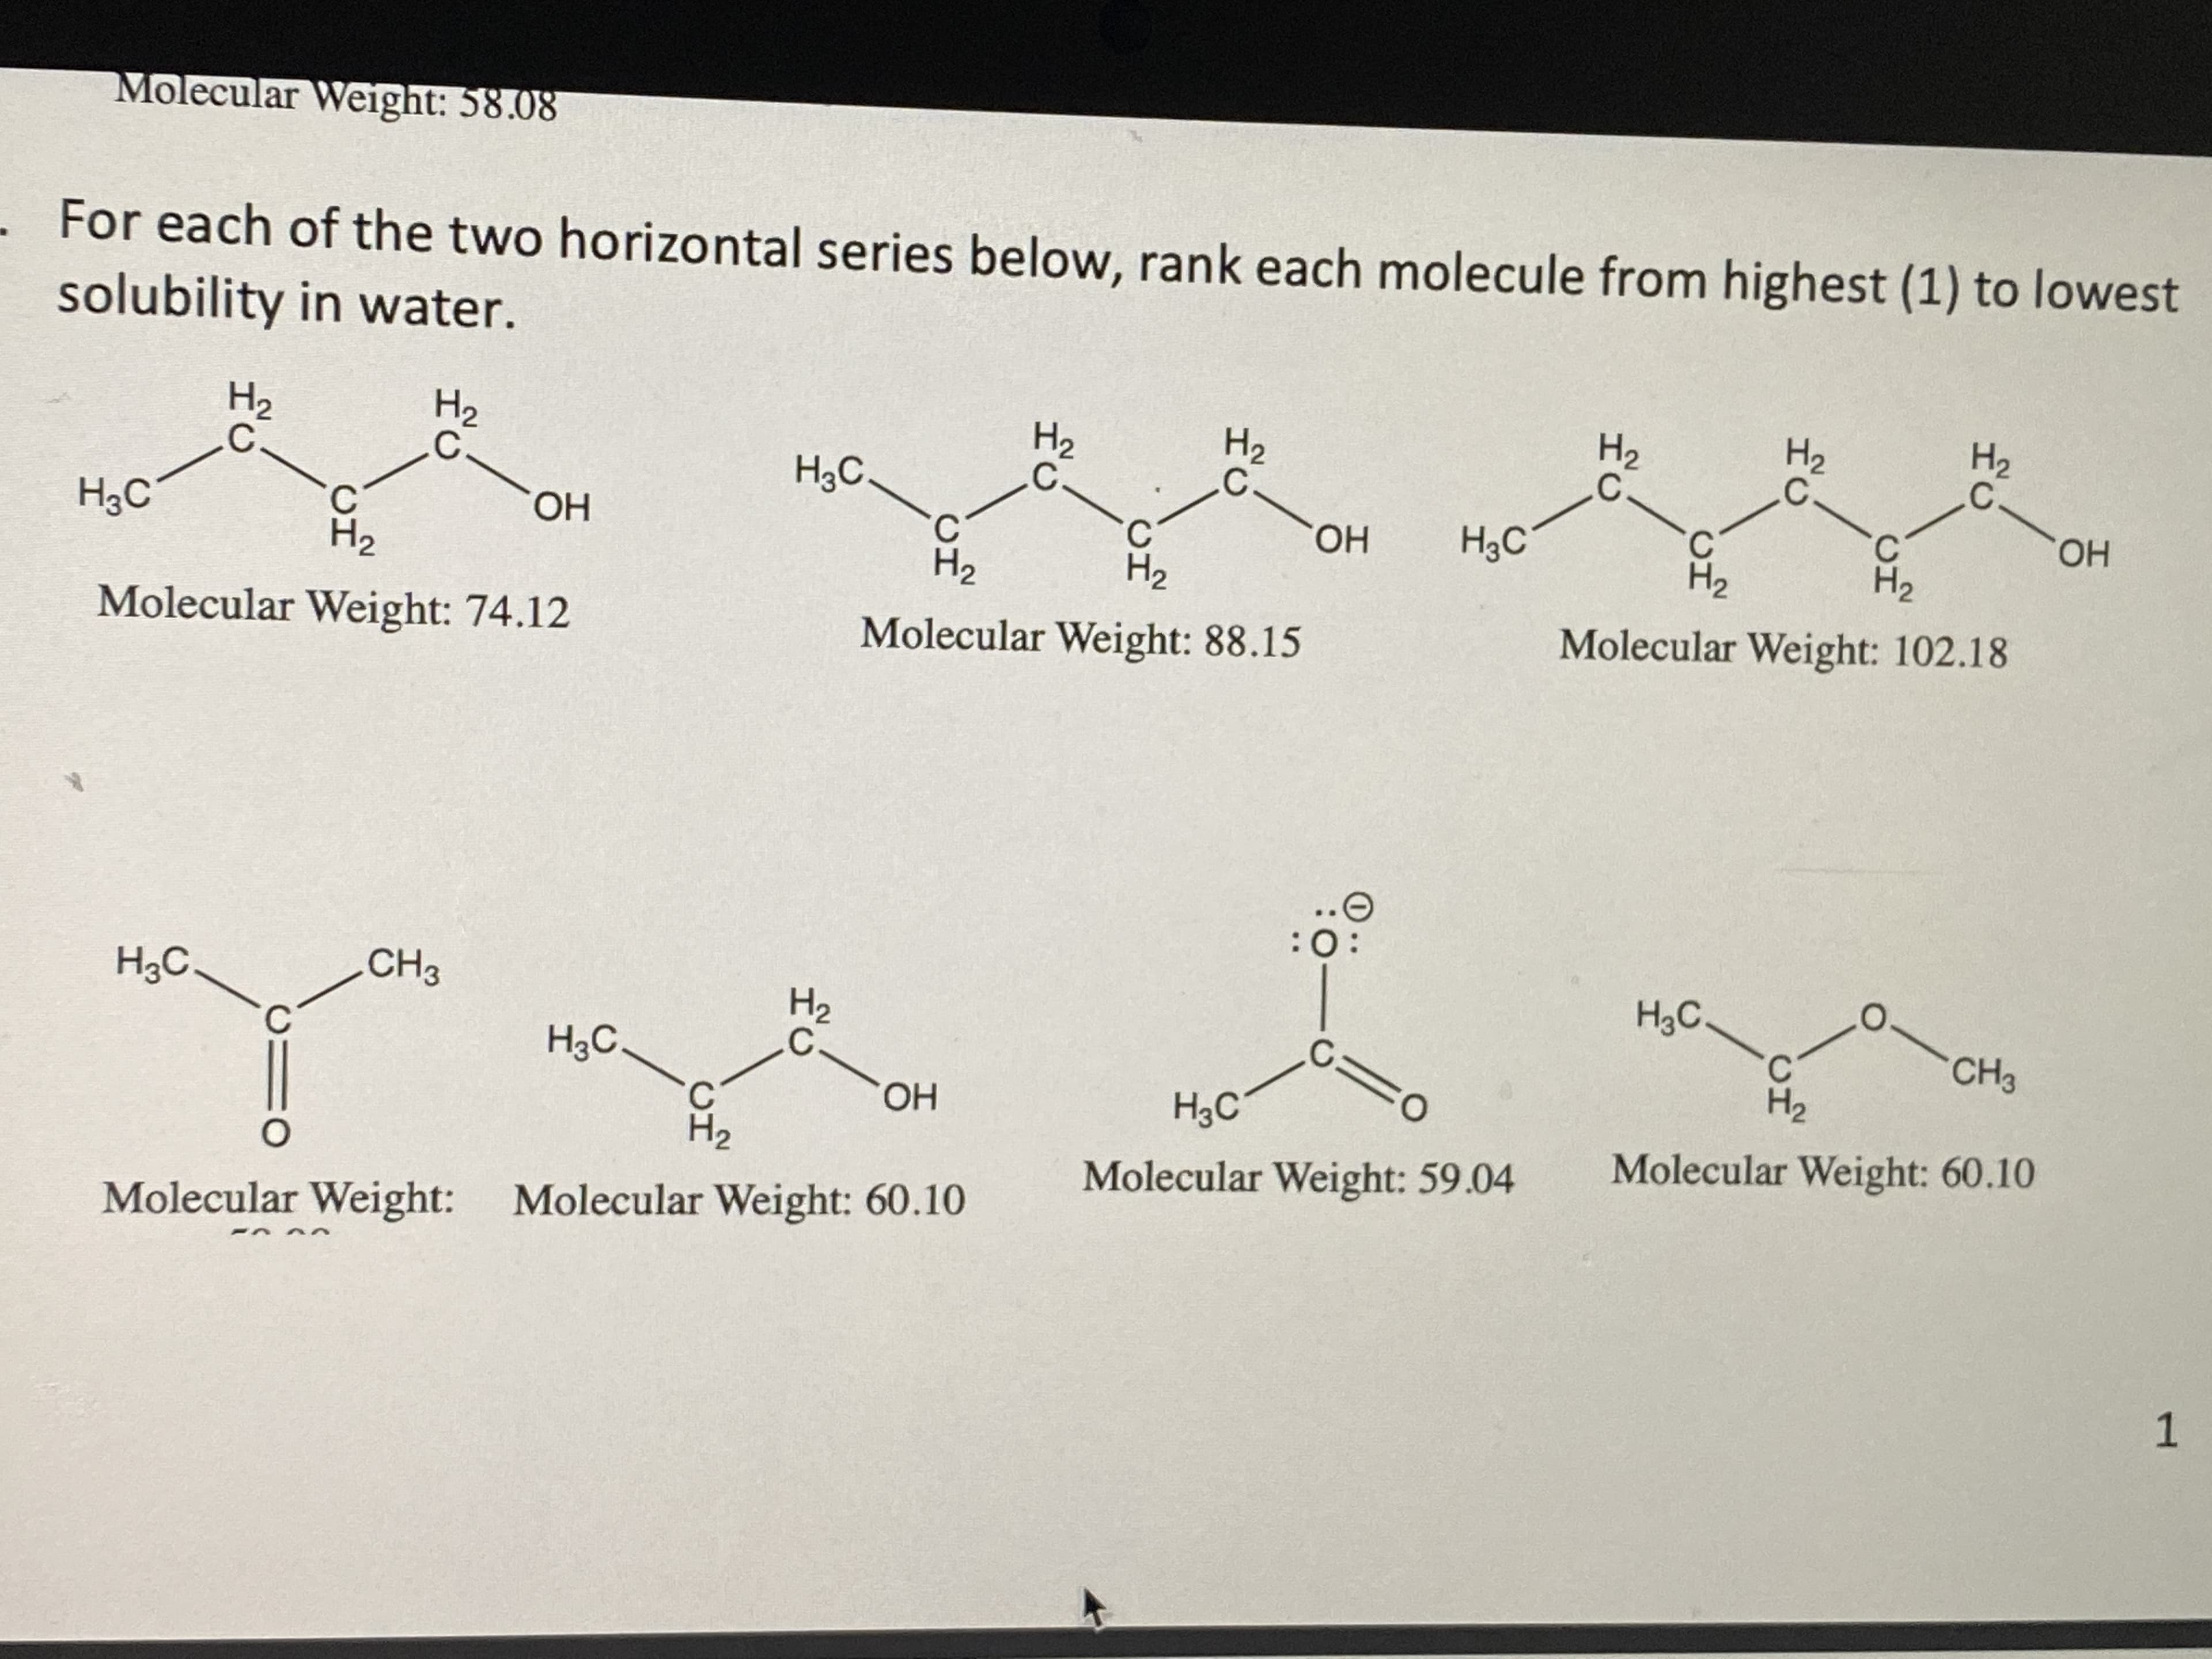 For each of the two horizontal series below, rank each molecule from highest (1) to lowest
solubility in water.
